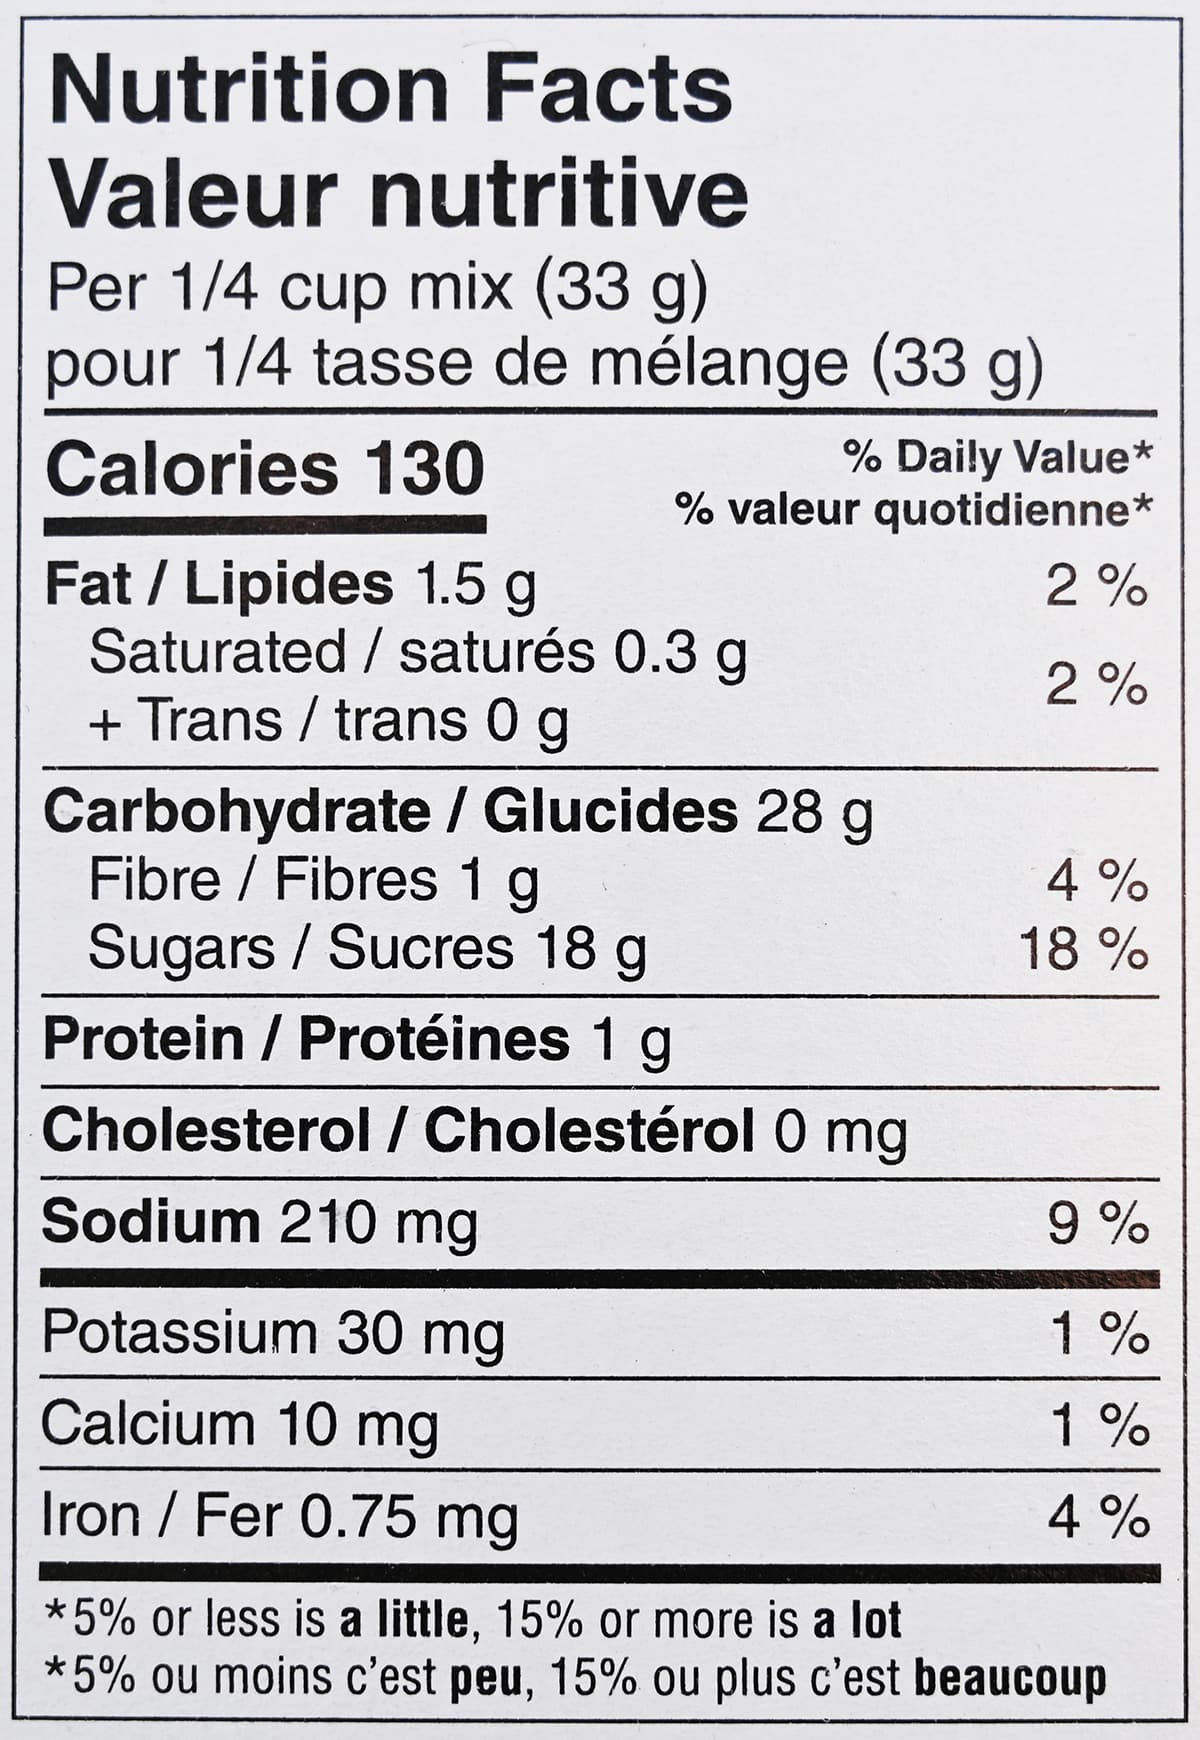 Image of the nutrition facts for the pumpkin spice quick bread mix from the back of the box.